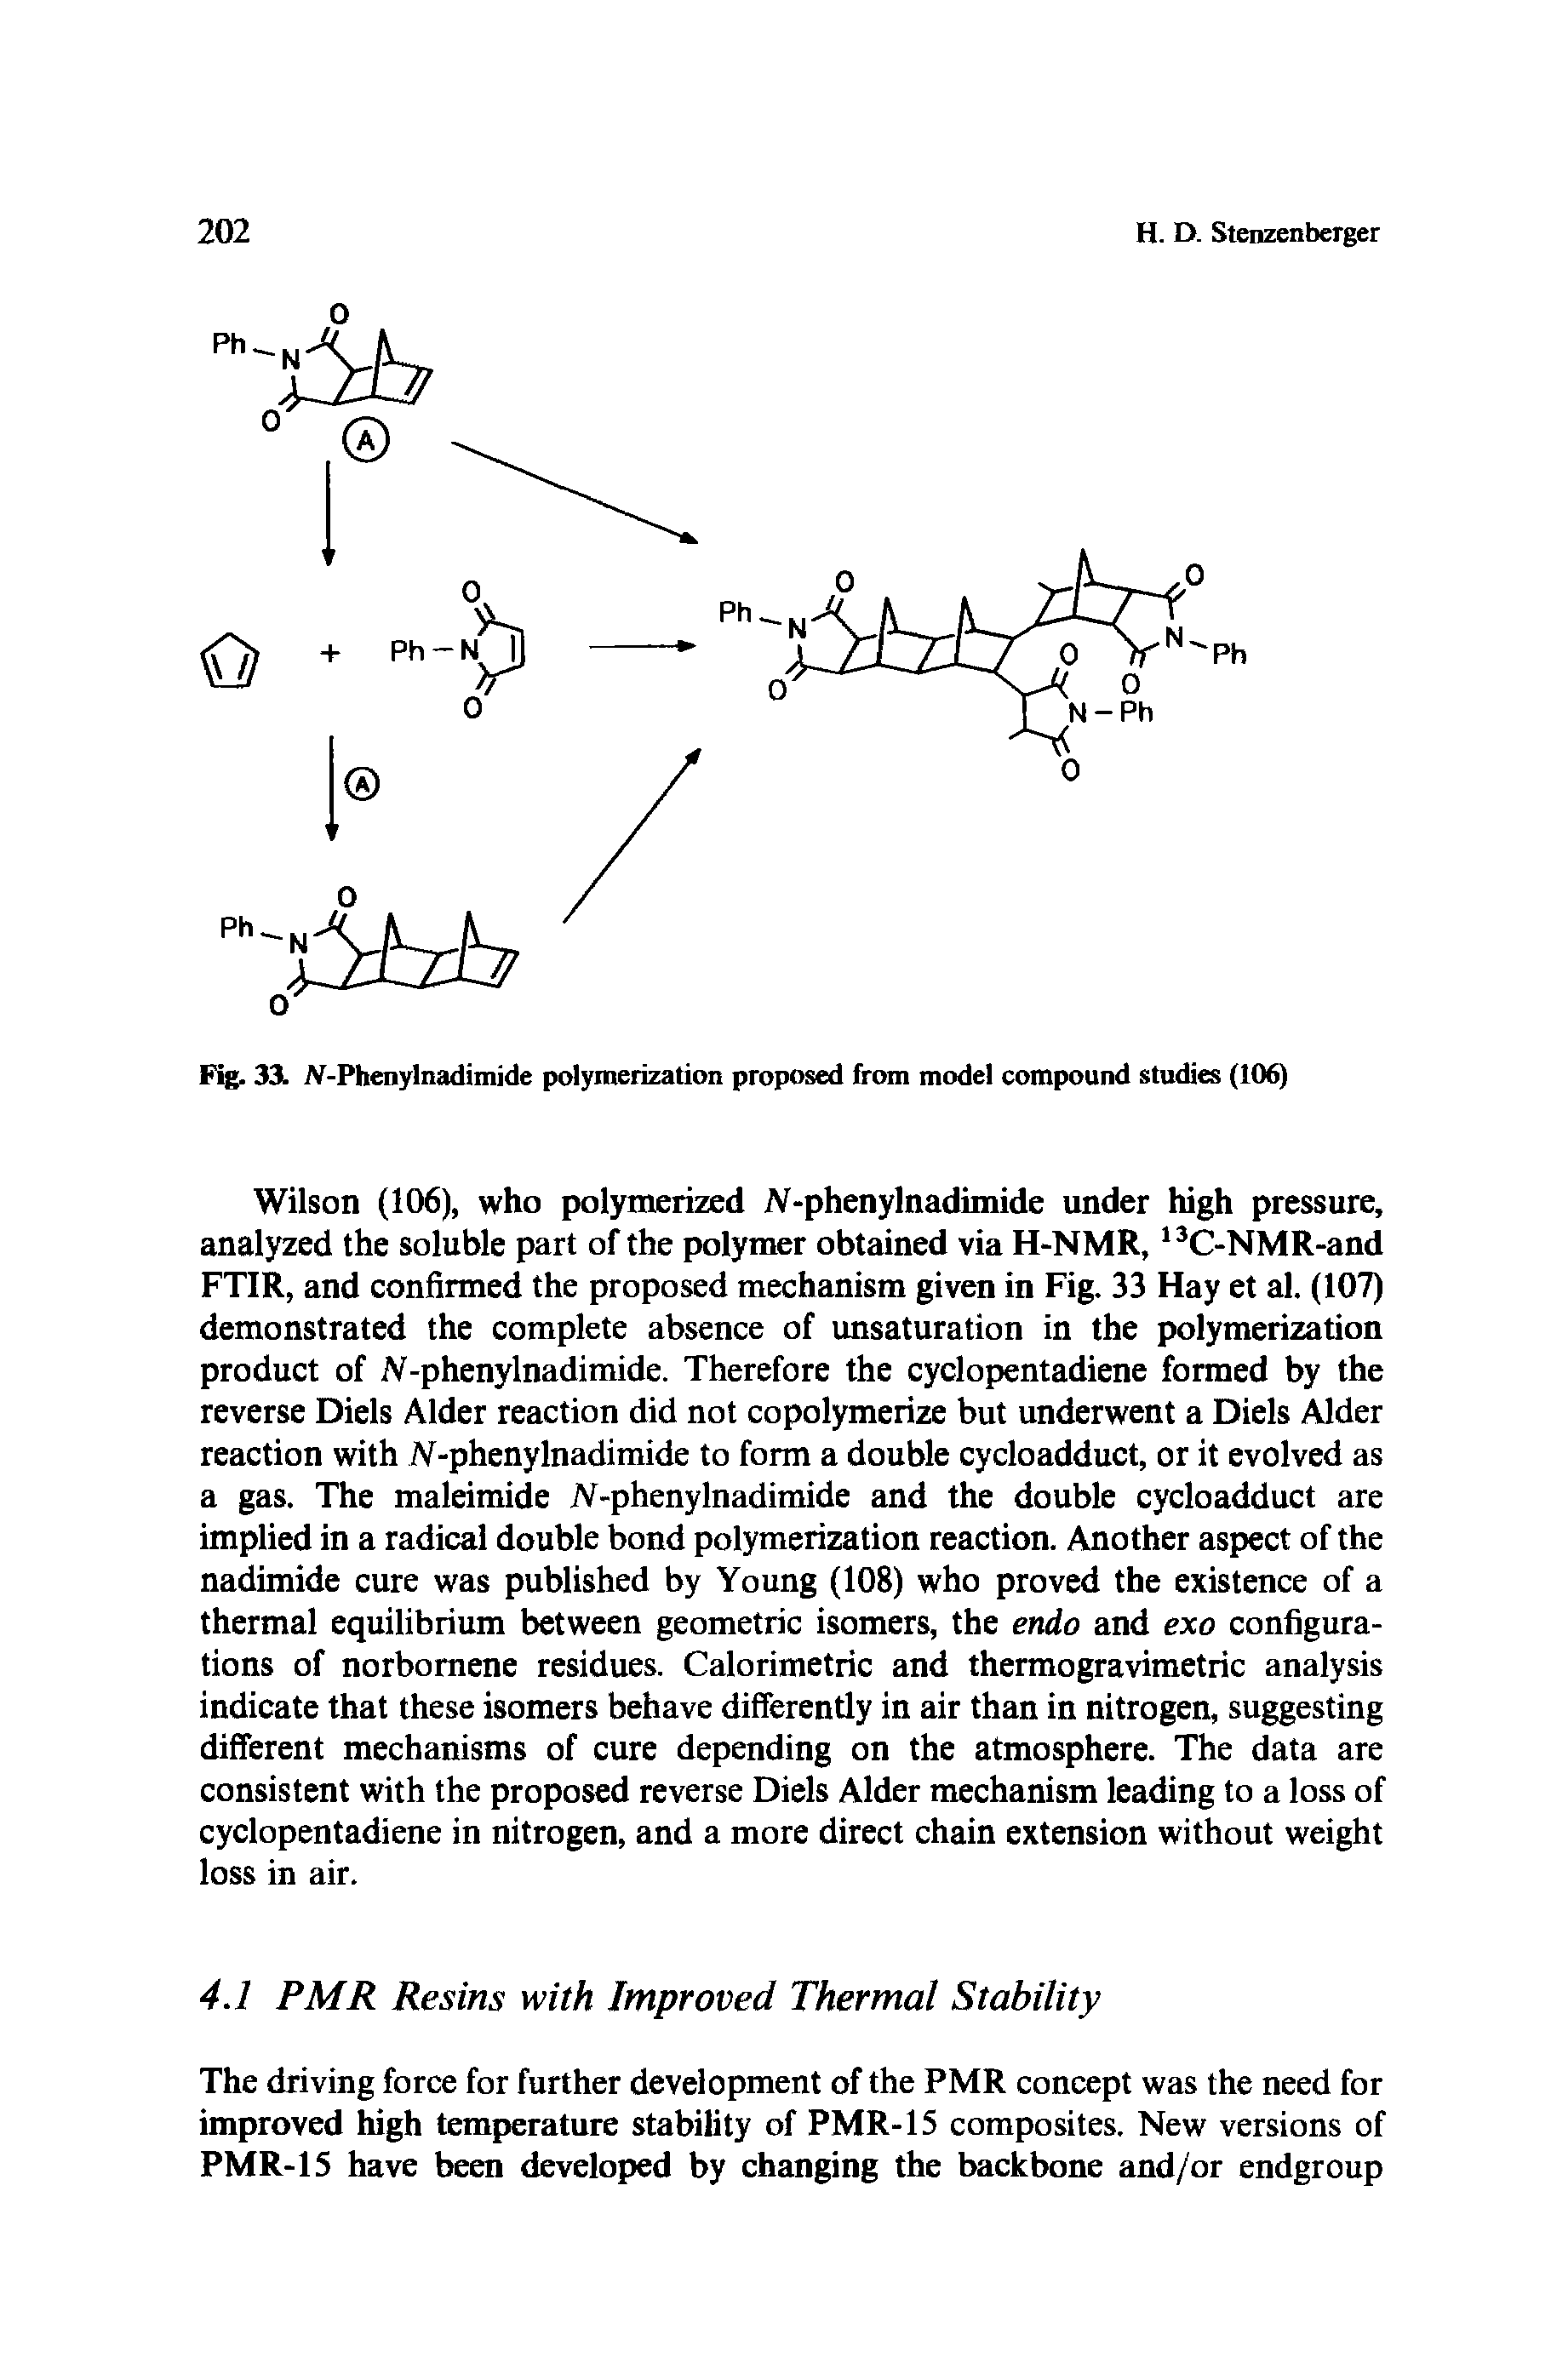 Fig. 33. JV-Phenylnadimide polymerization proposed from model compound studies (106)...